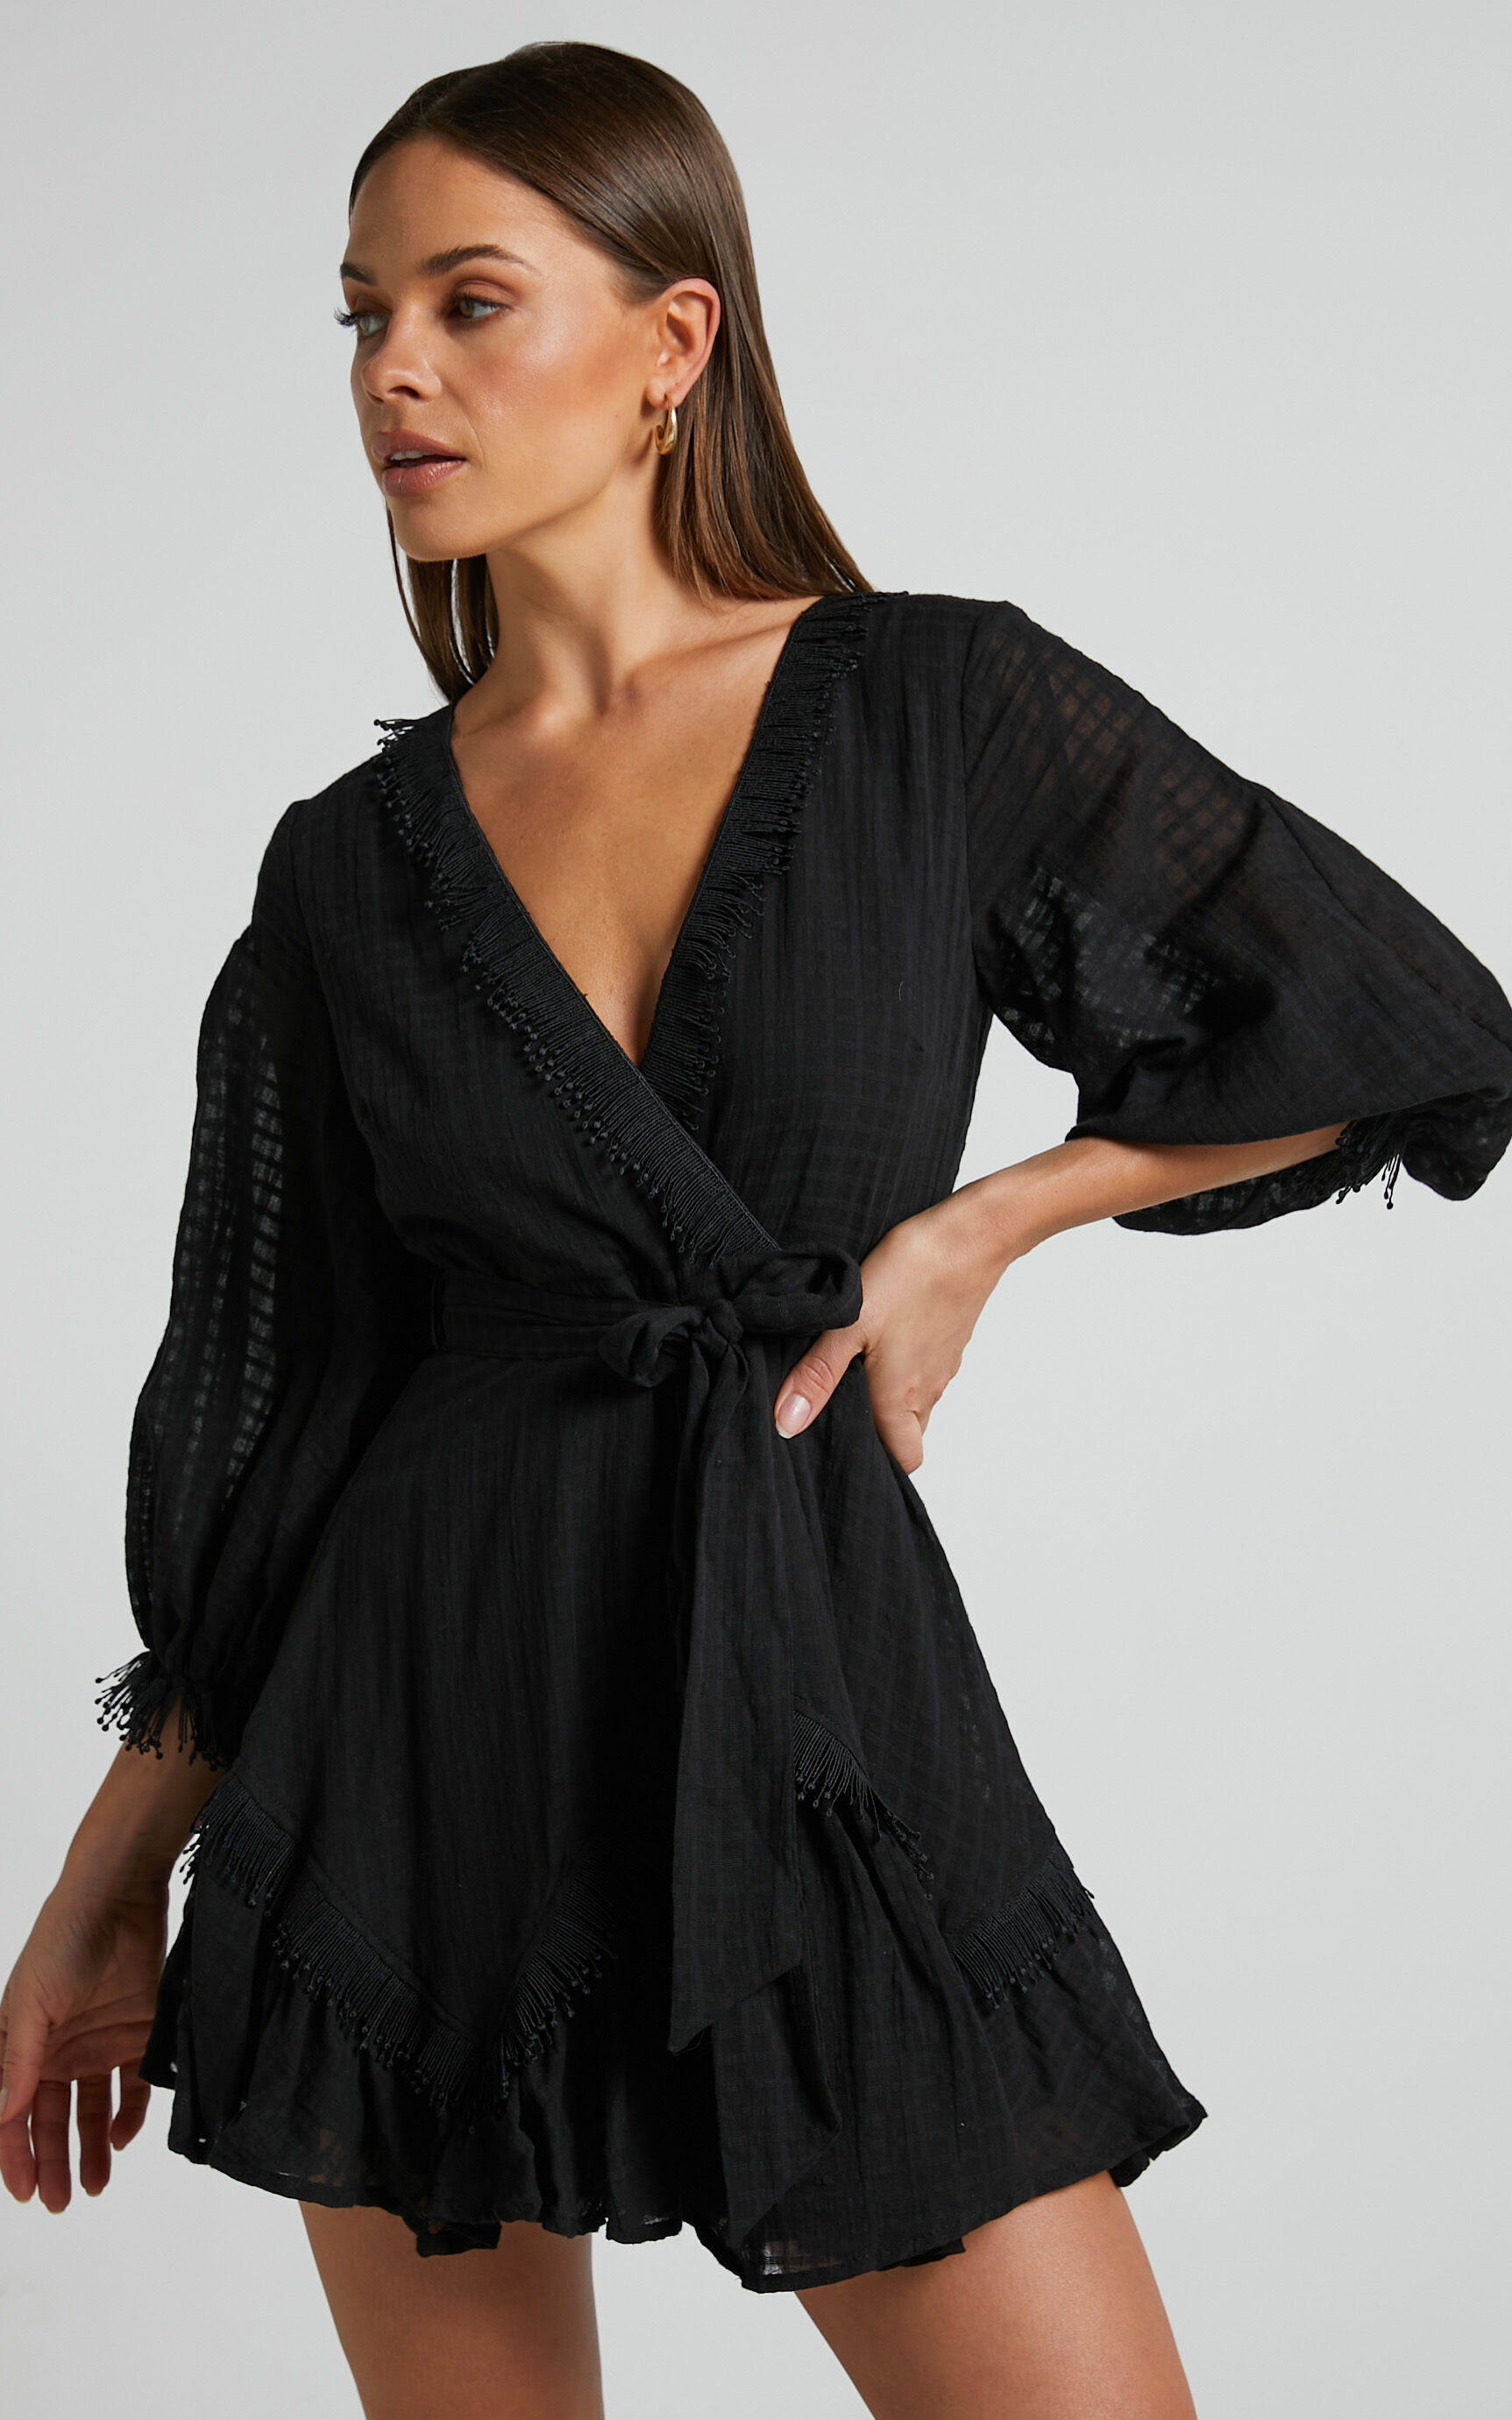 Gawain Puff Sleeve Textured Frill Detail Mini Dress in Black - 06, BLK1, super-hi-res image number null